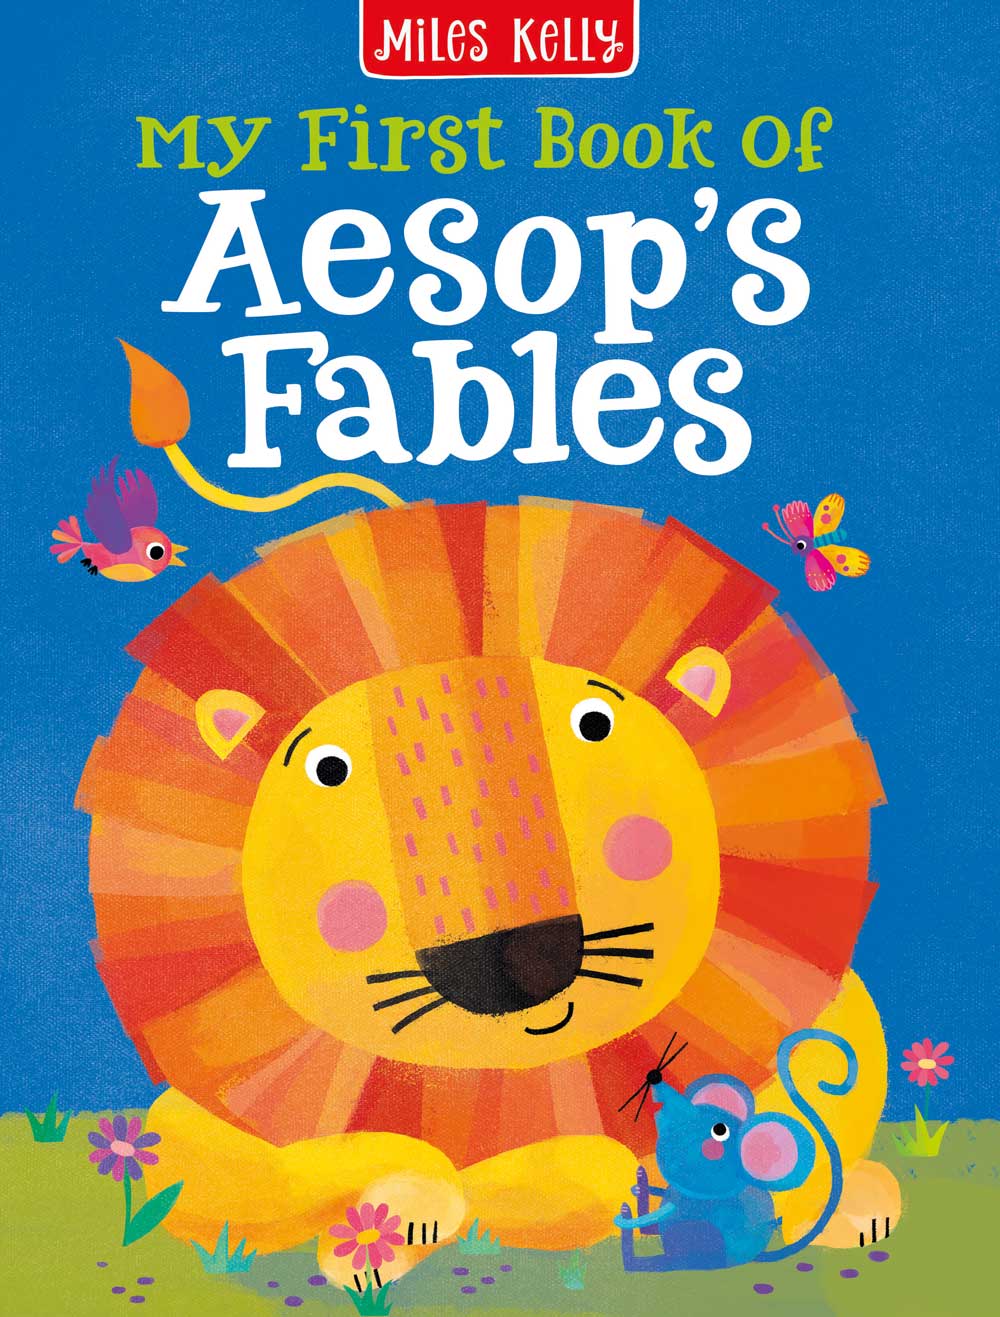 My First Book of Aesop's Fables for kids – Miles Kelly